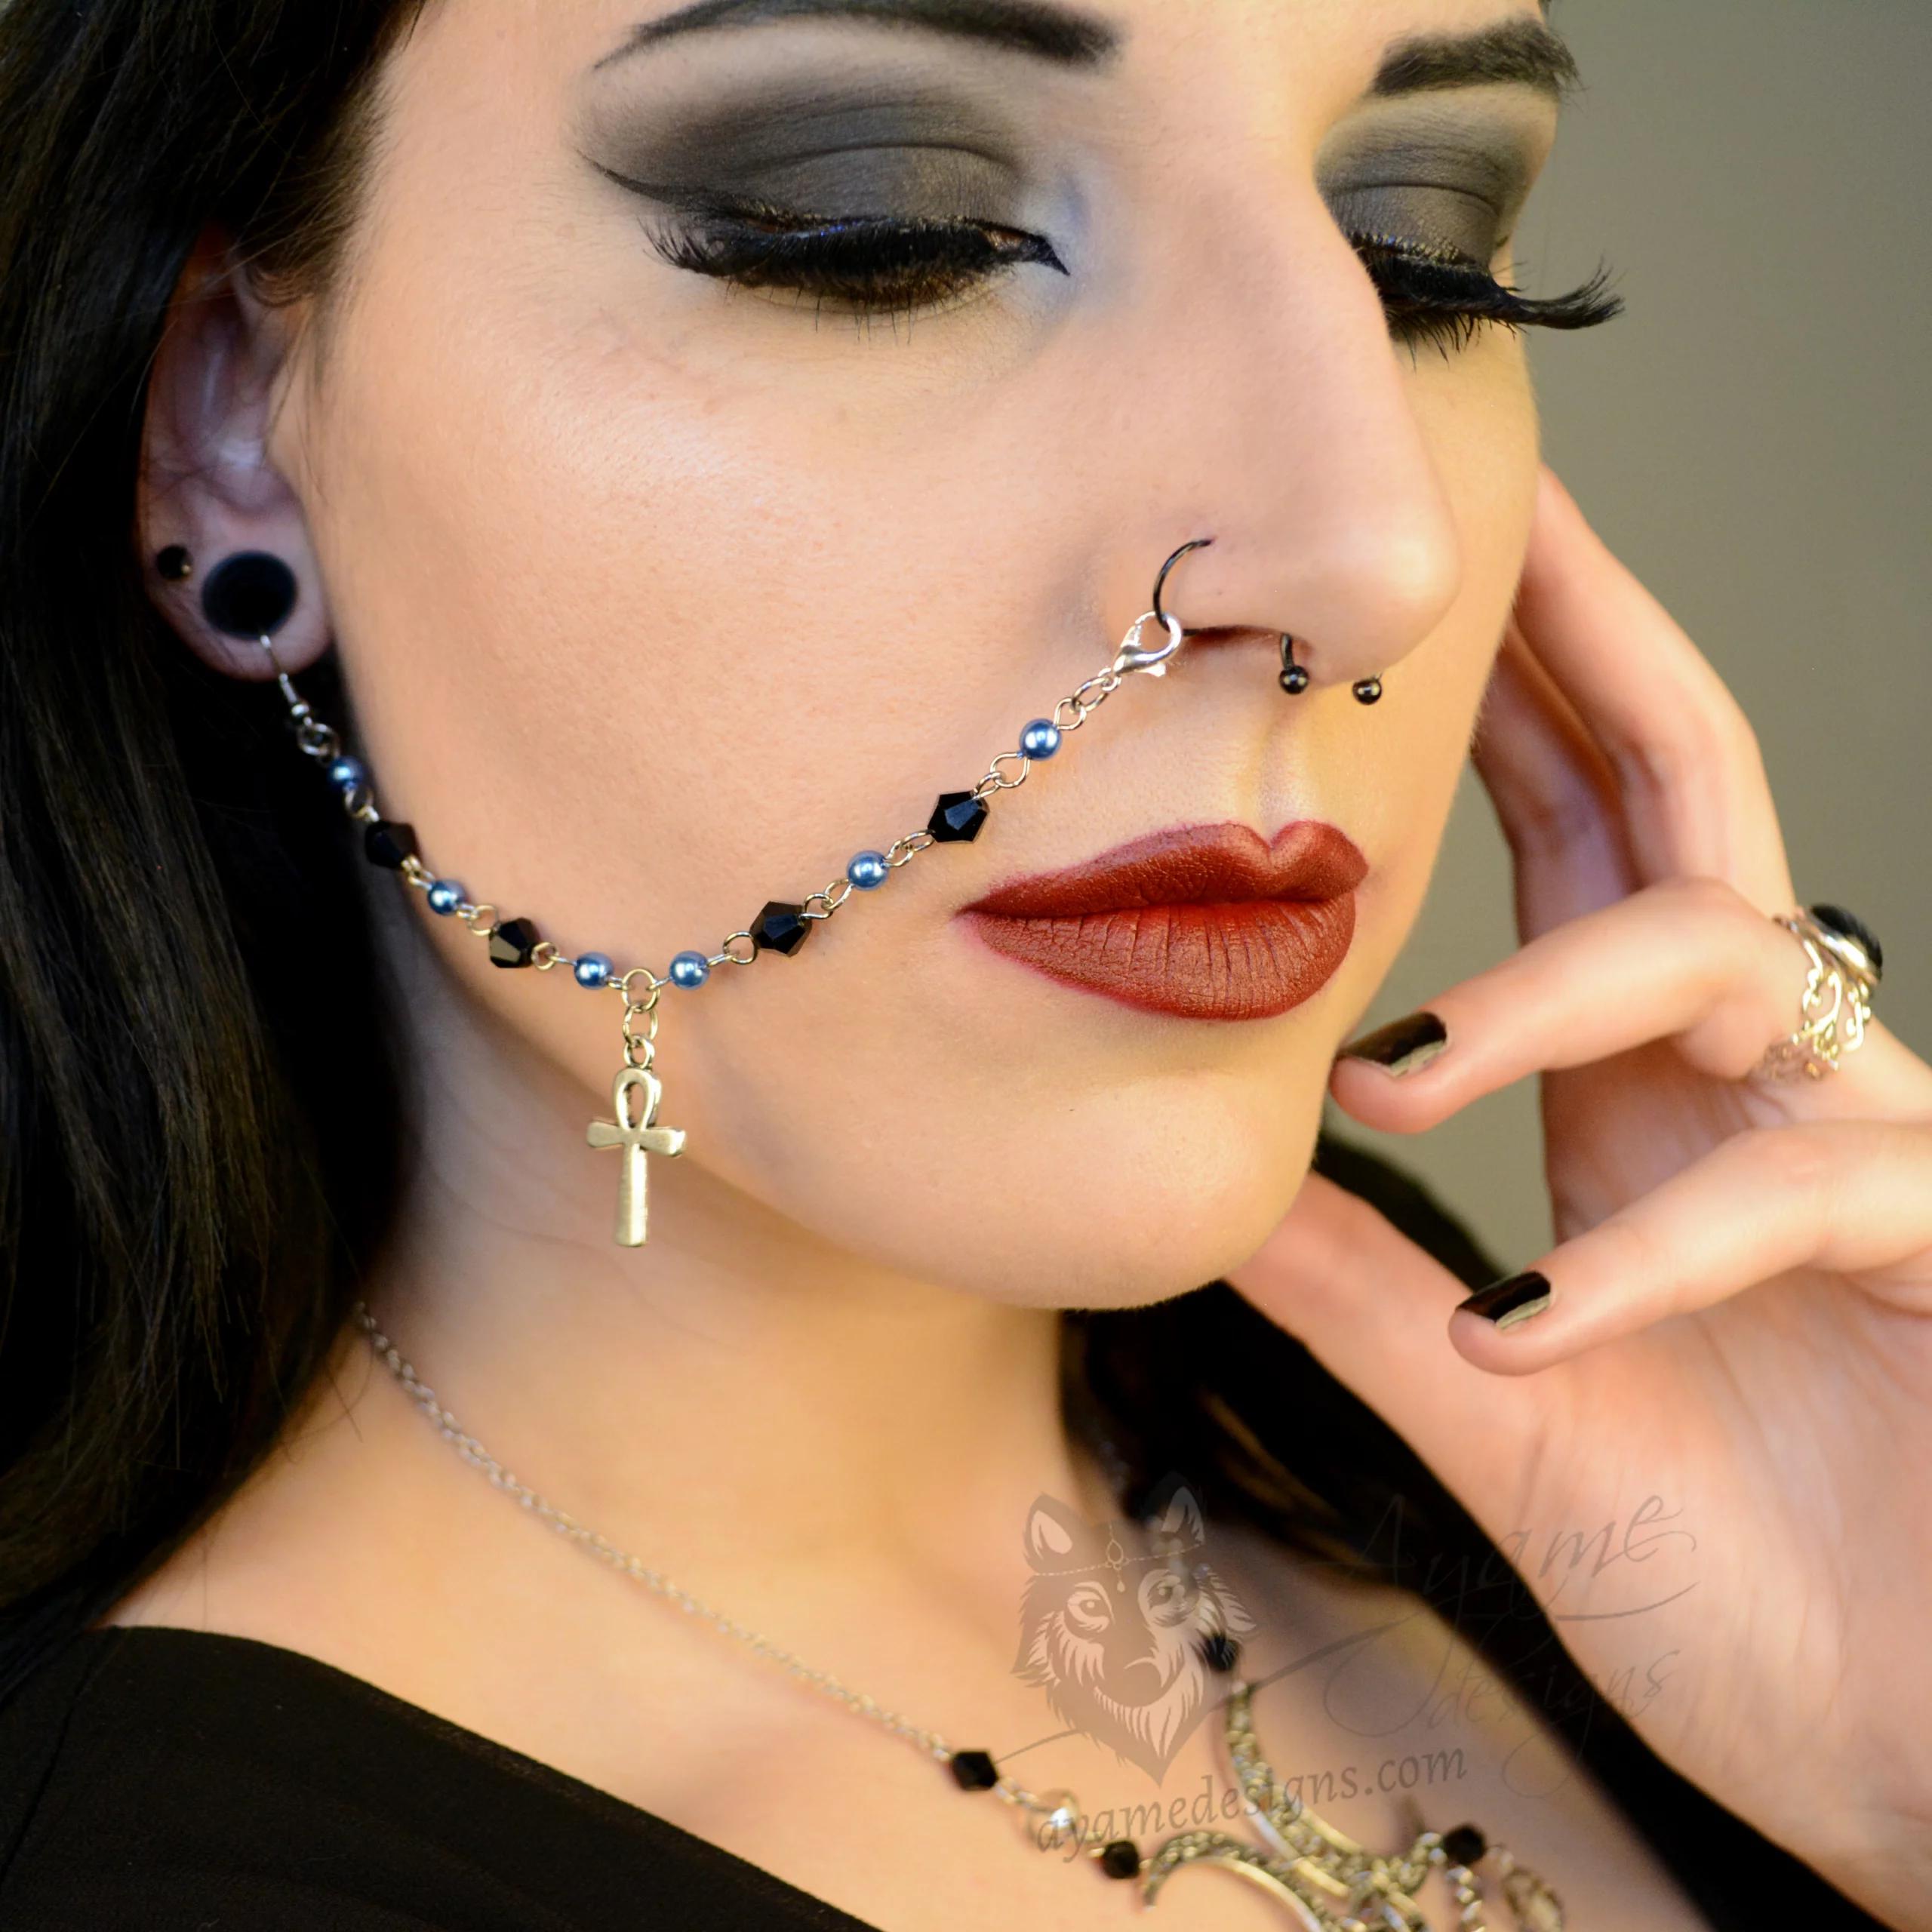 Handmade nose to ear chain with an ankh charm, black Austrian crystal beads and blue glass pearl beads